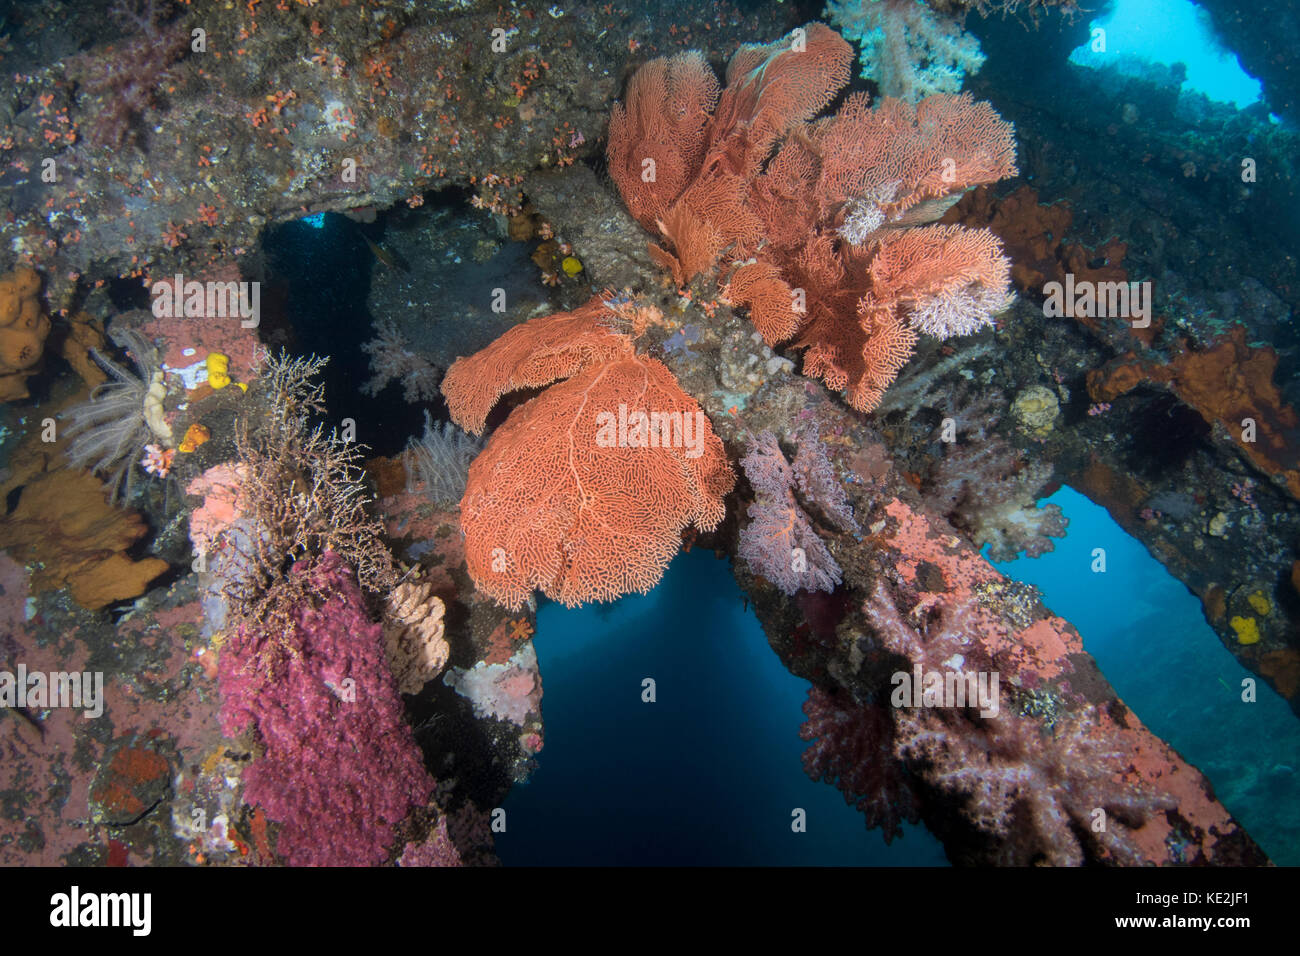 Sea fans, coral, and sponge growith on the USS Liberty Wreck off Tulamben on the island of Bali, Indonesia. Stock Photo